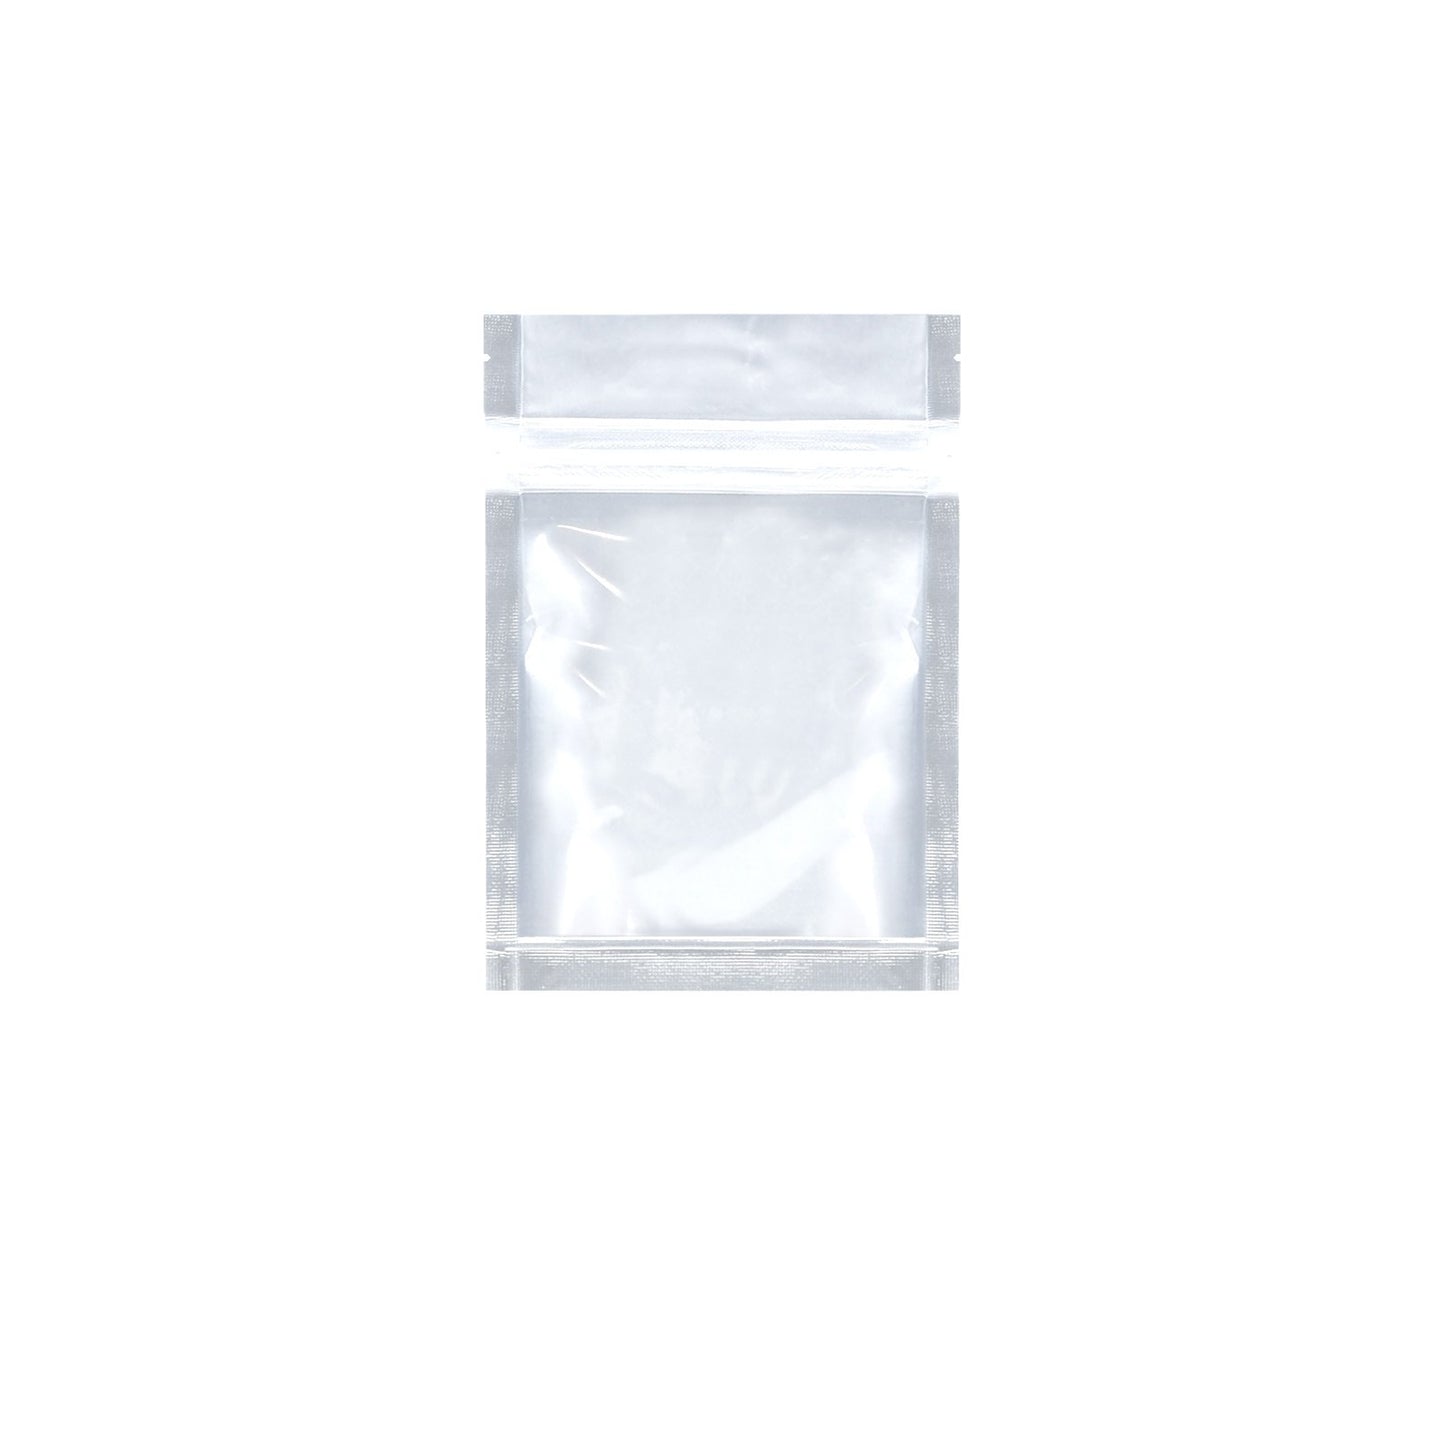  Mylar Bag Tear Notch Clear Black 1G 1000 COUNT at Flower Power Packages